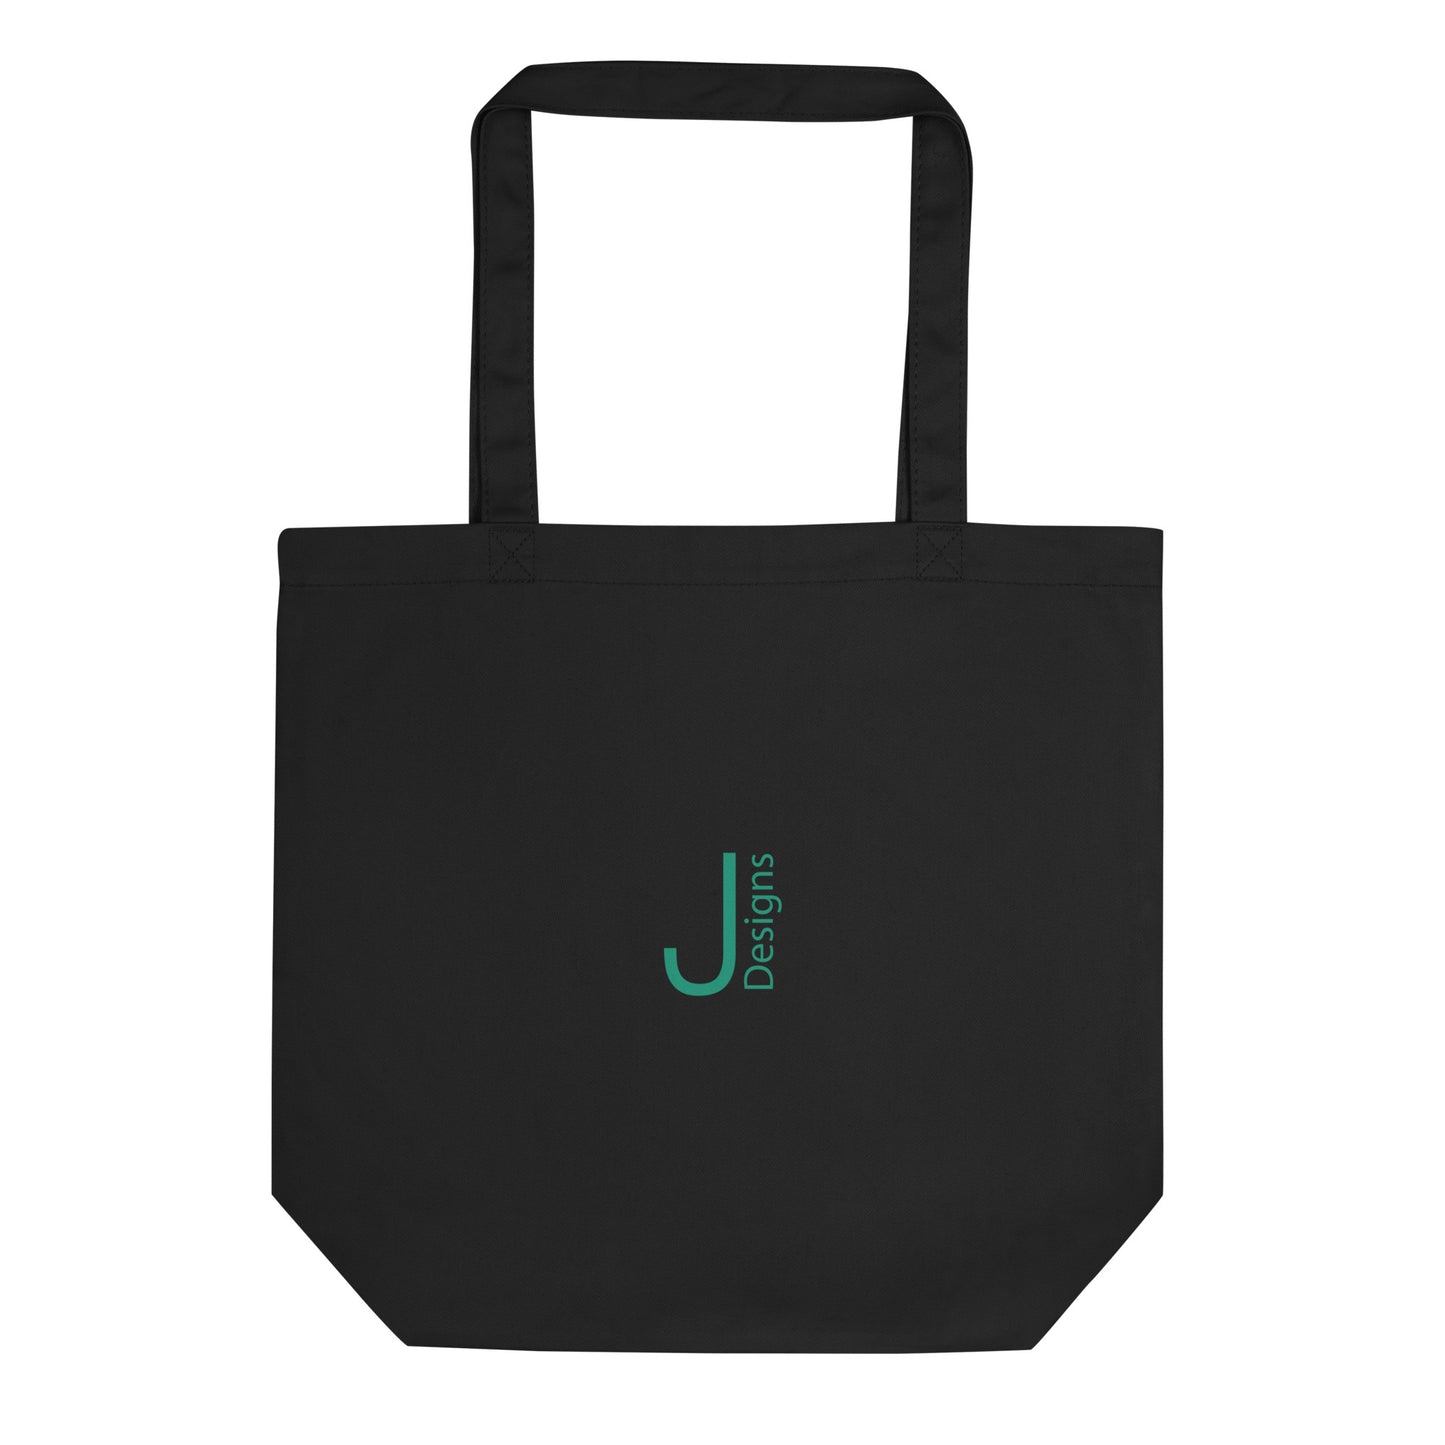 Tote Bag - Design Created By Olivia